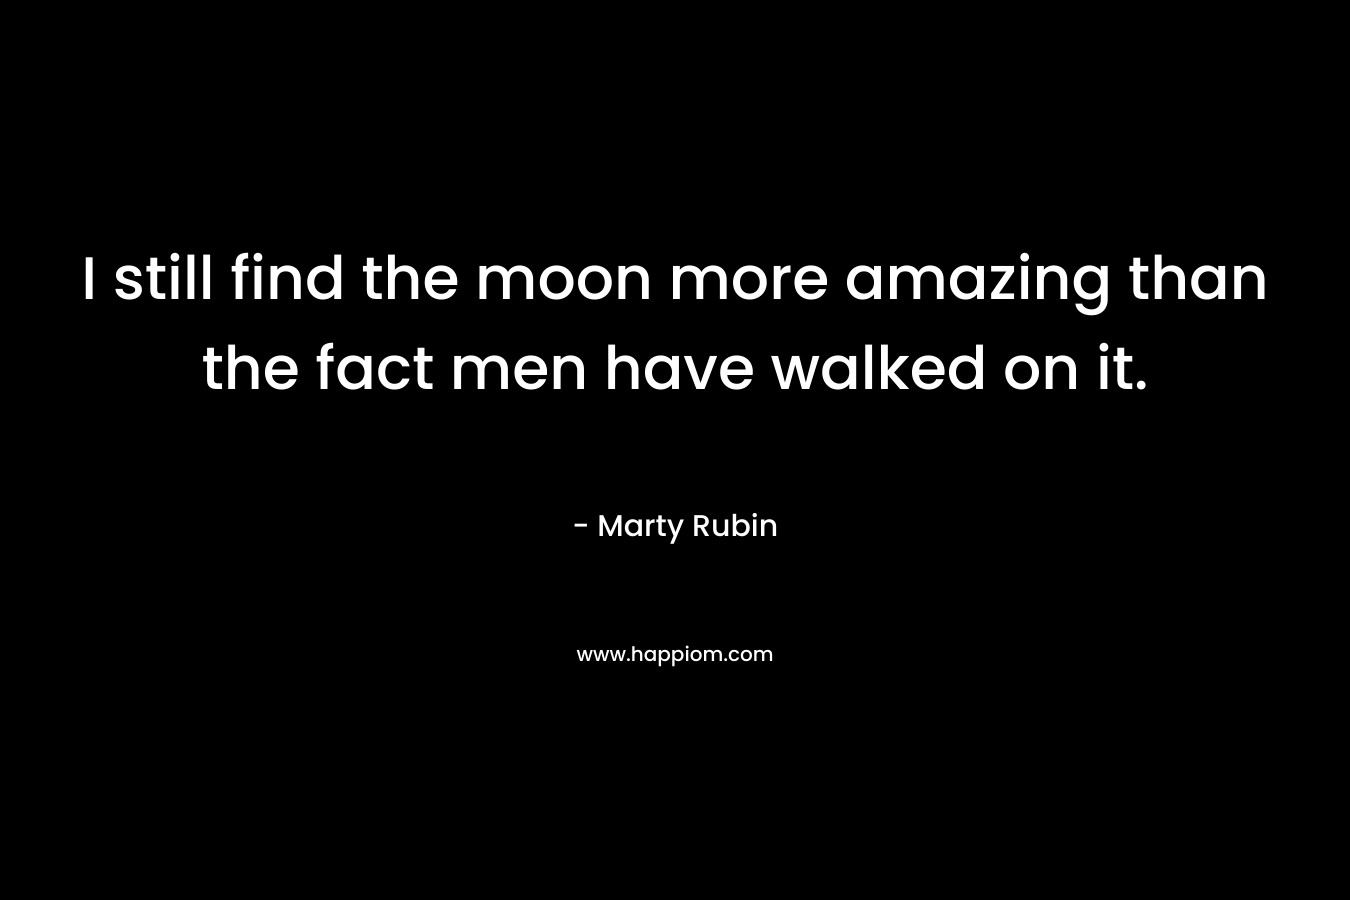 I still find the moon more amazing than the fact men have walked on it. – Marty Rubin